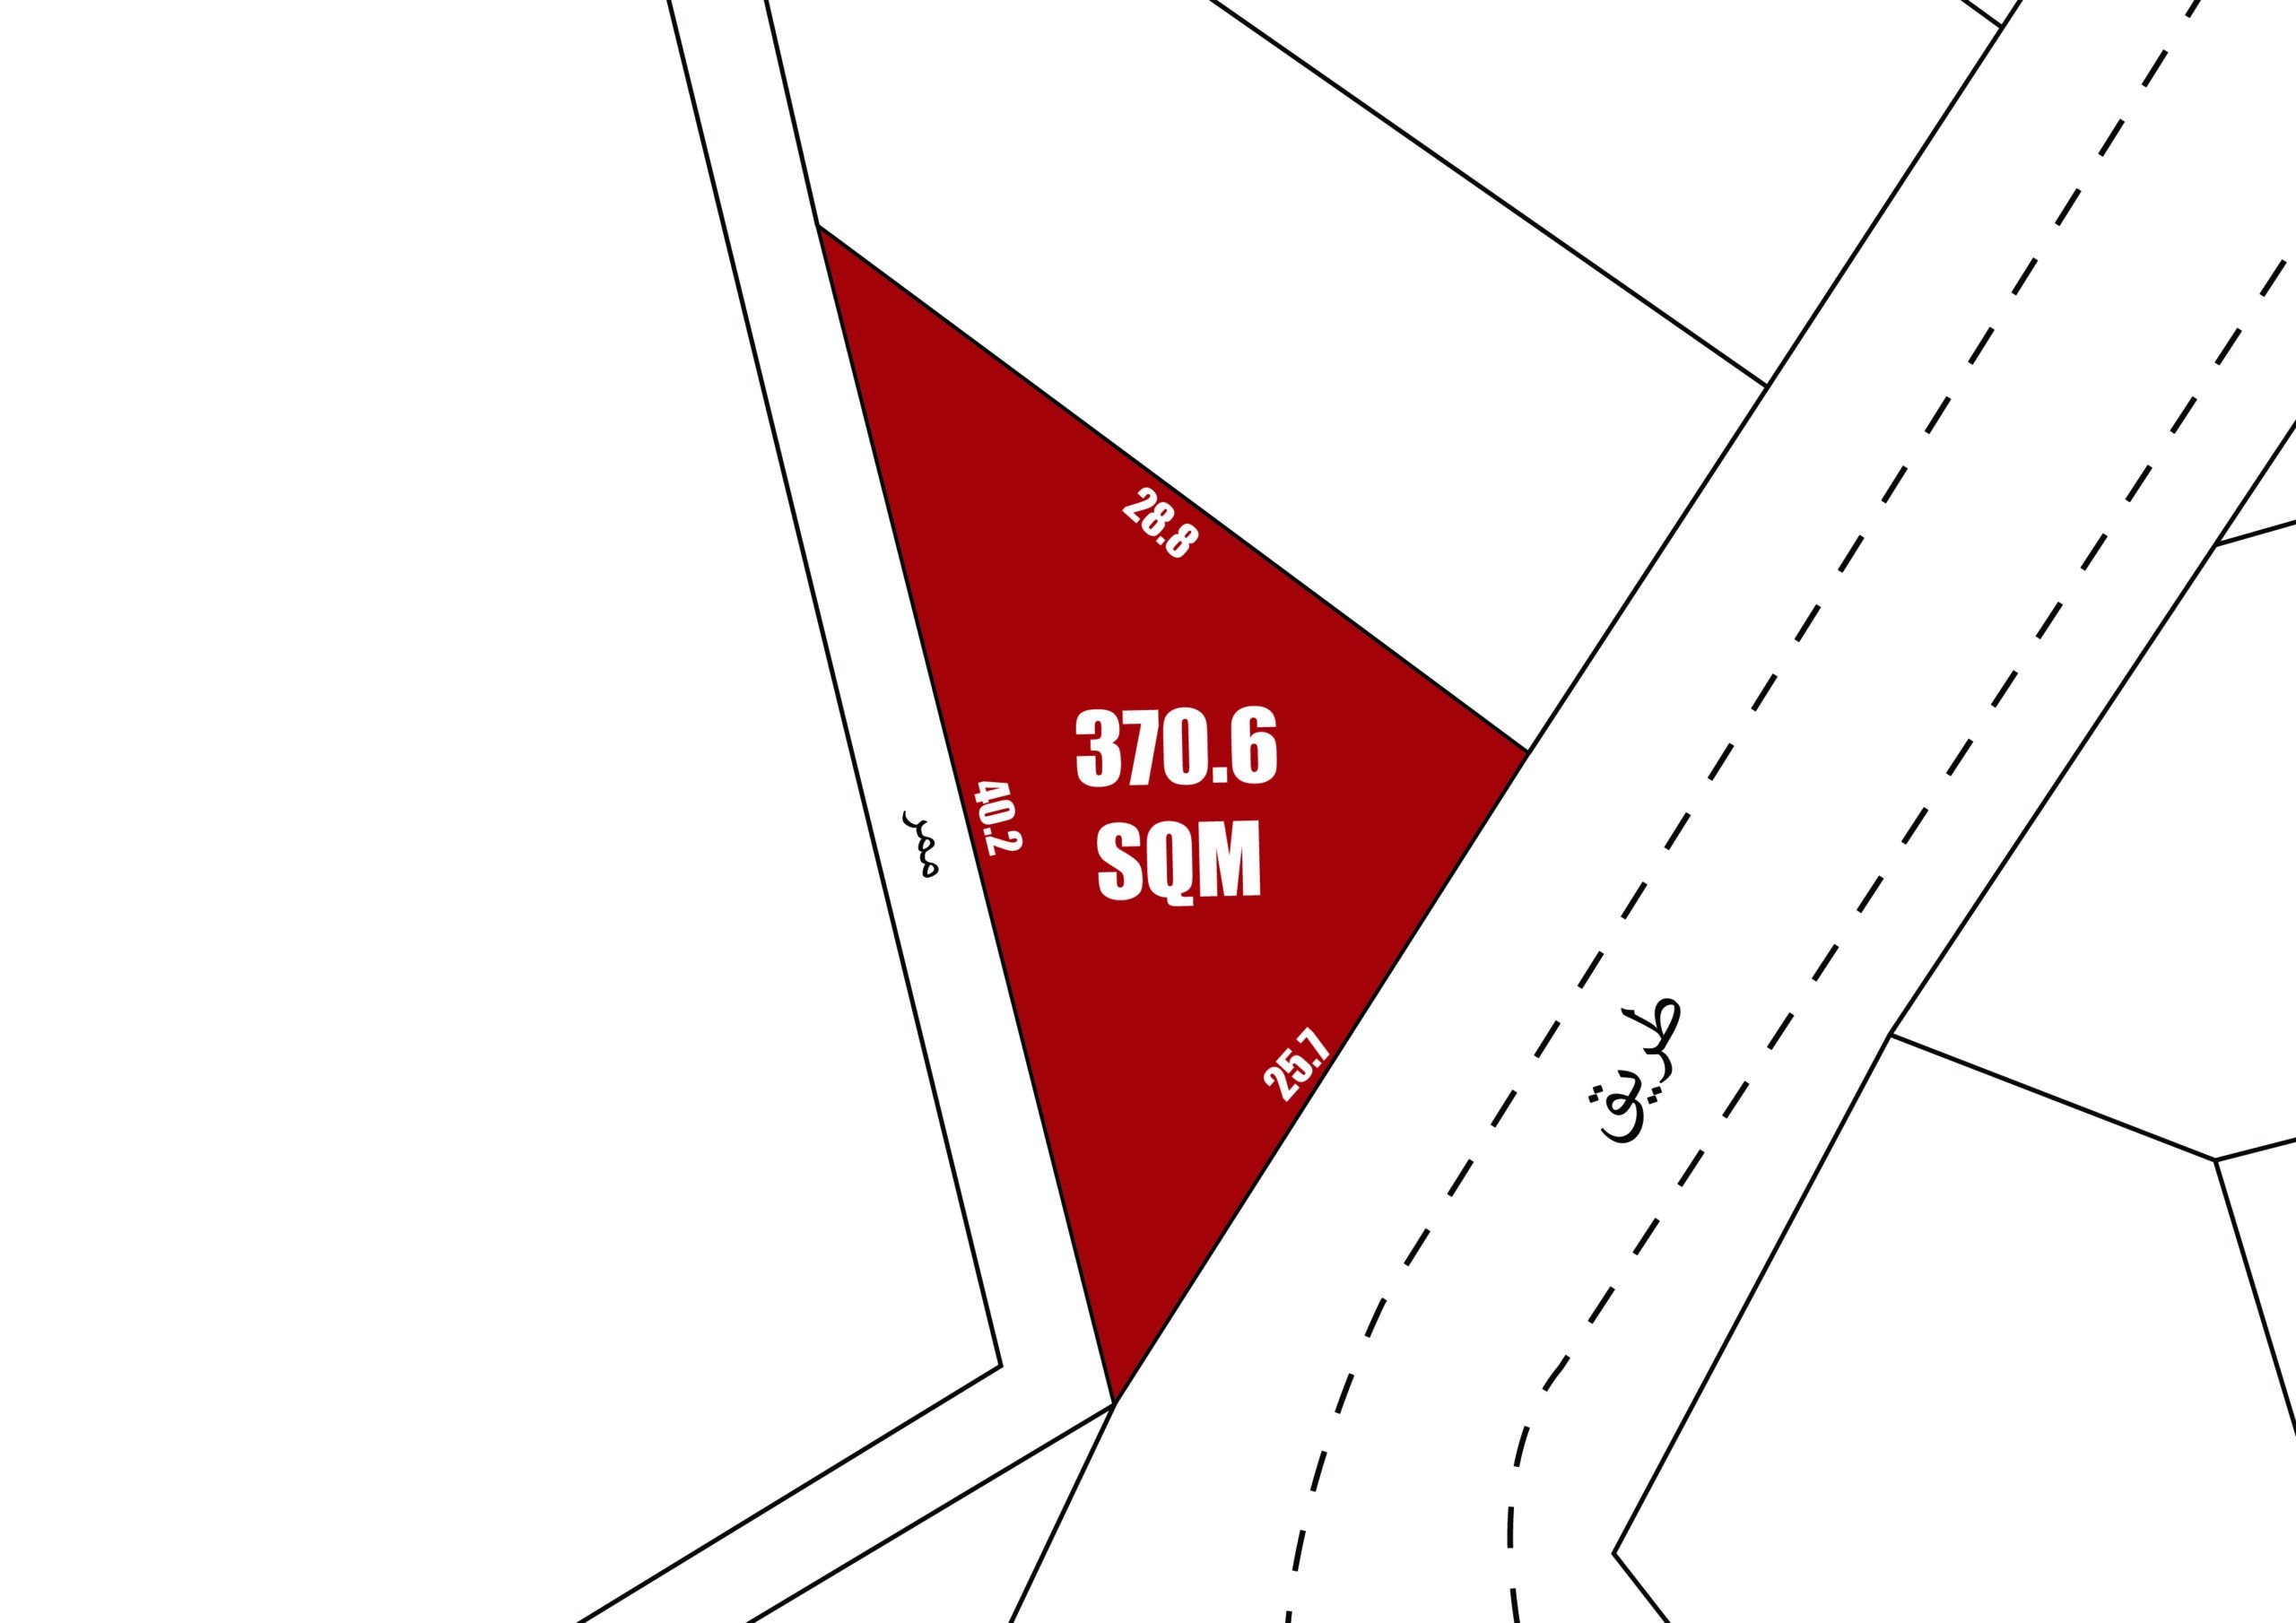 An overhead view of a red-highlighted triangular plot in Saar on a map, labeled 370.6 sqm, with surrounding roads and plots in white.